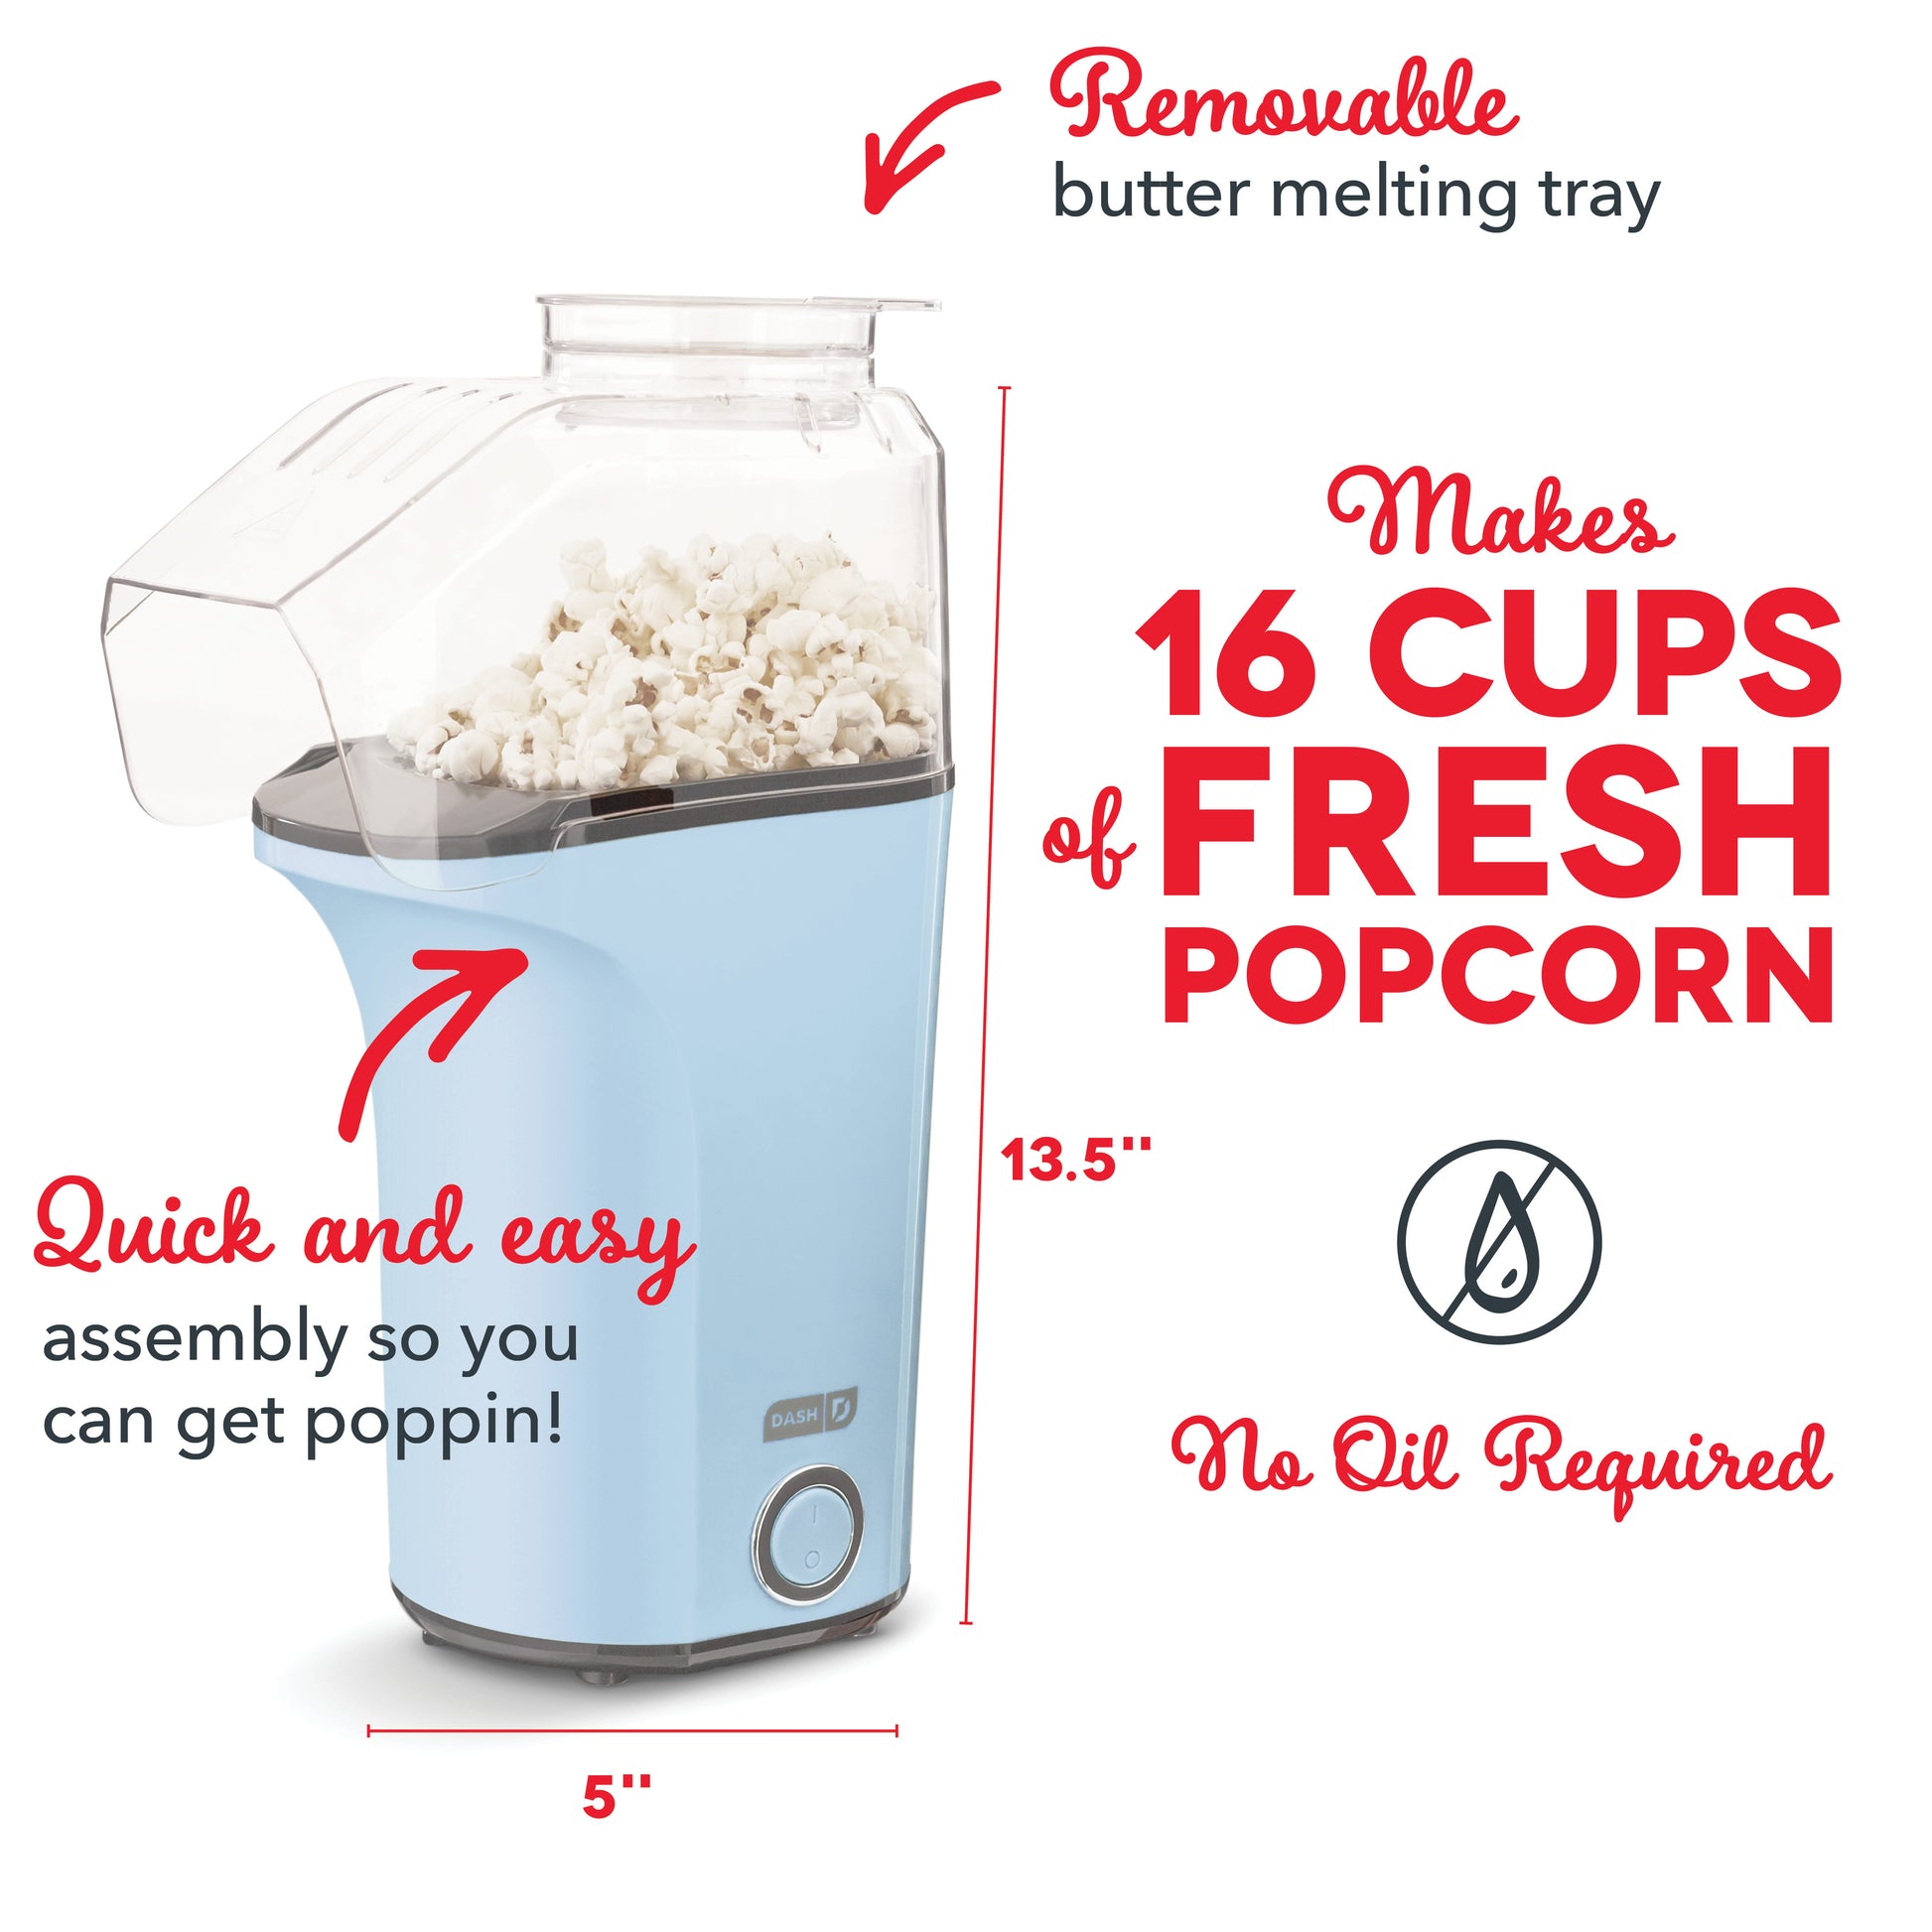 DASH Hot Air Popcorn Popper Maker with Measuring Cup to Portion Popping  Corn Kernels + Melt Butter, 16 Cups - White